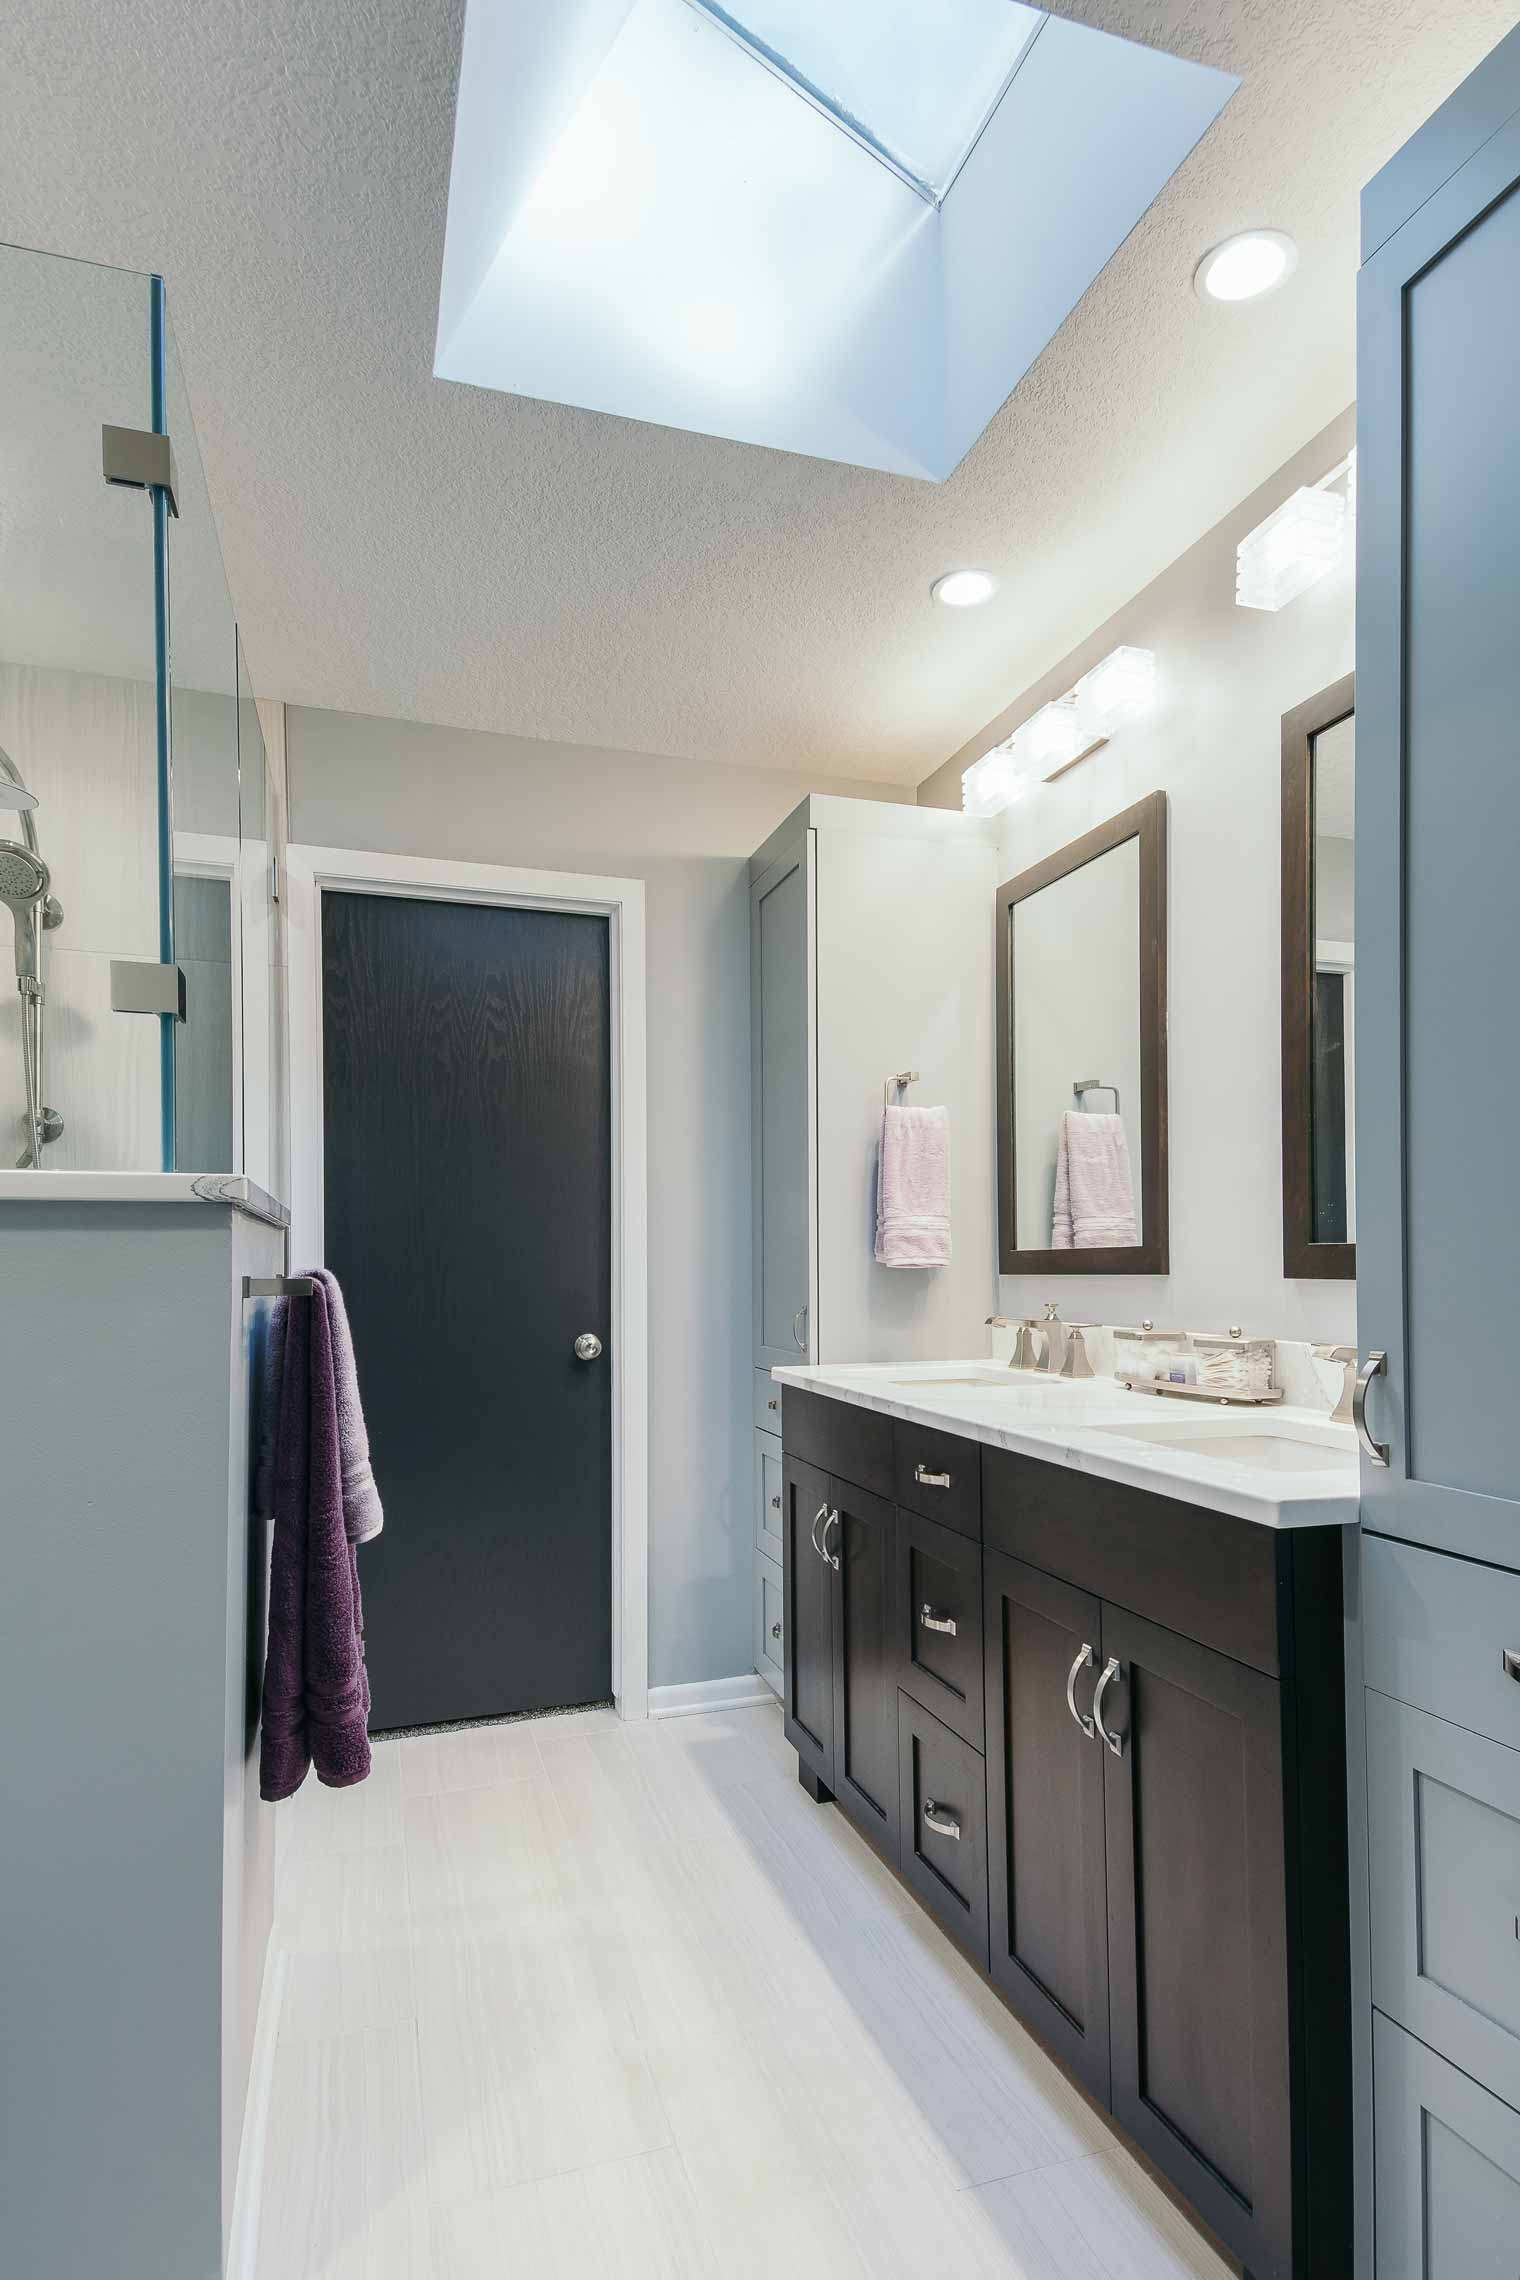 Skylight brings natural daylight into Des Moines bathroom by remodeler Silent Rivers